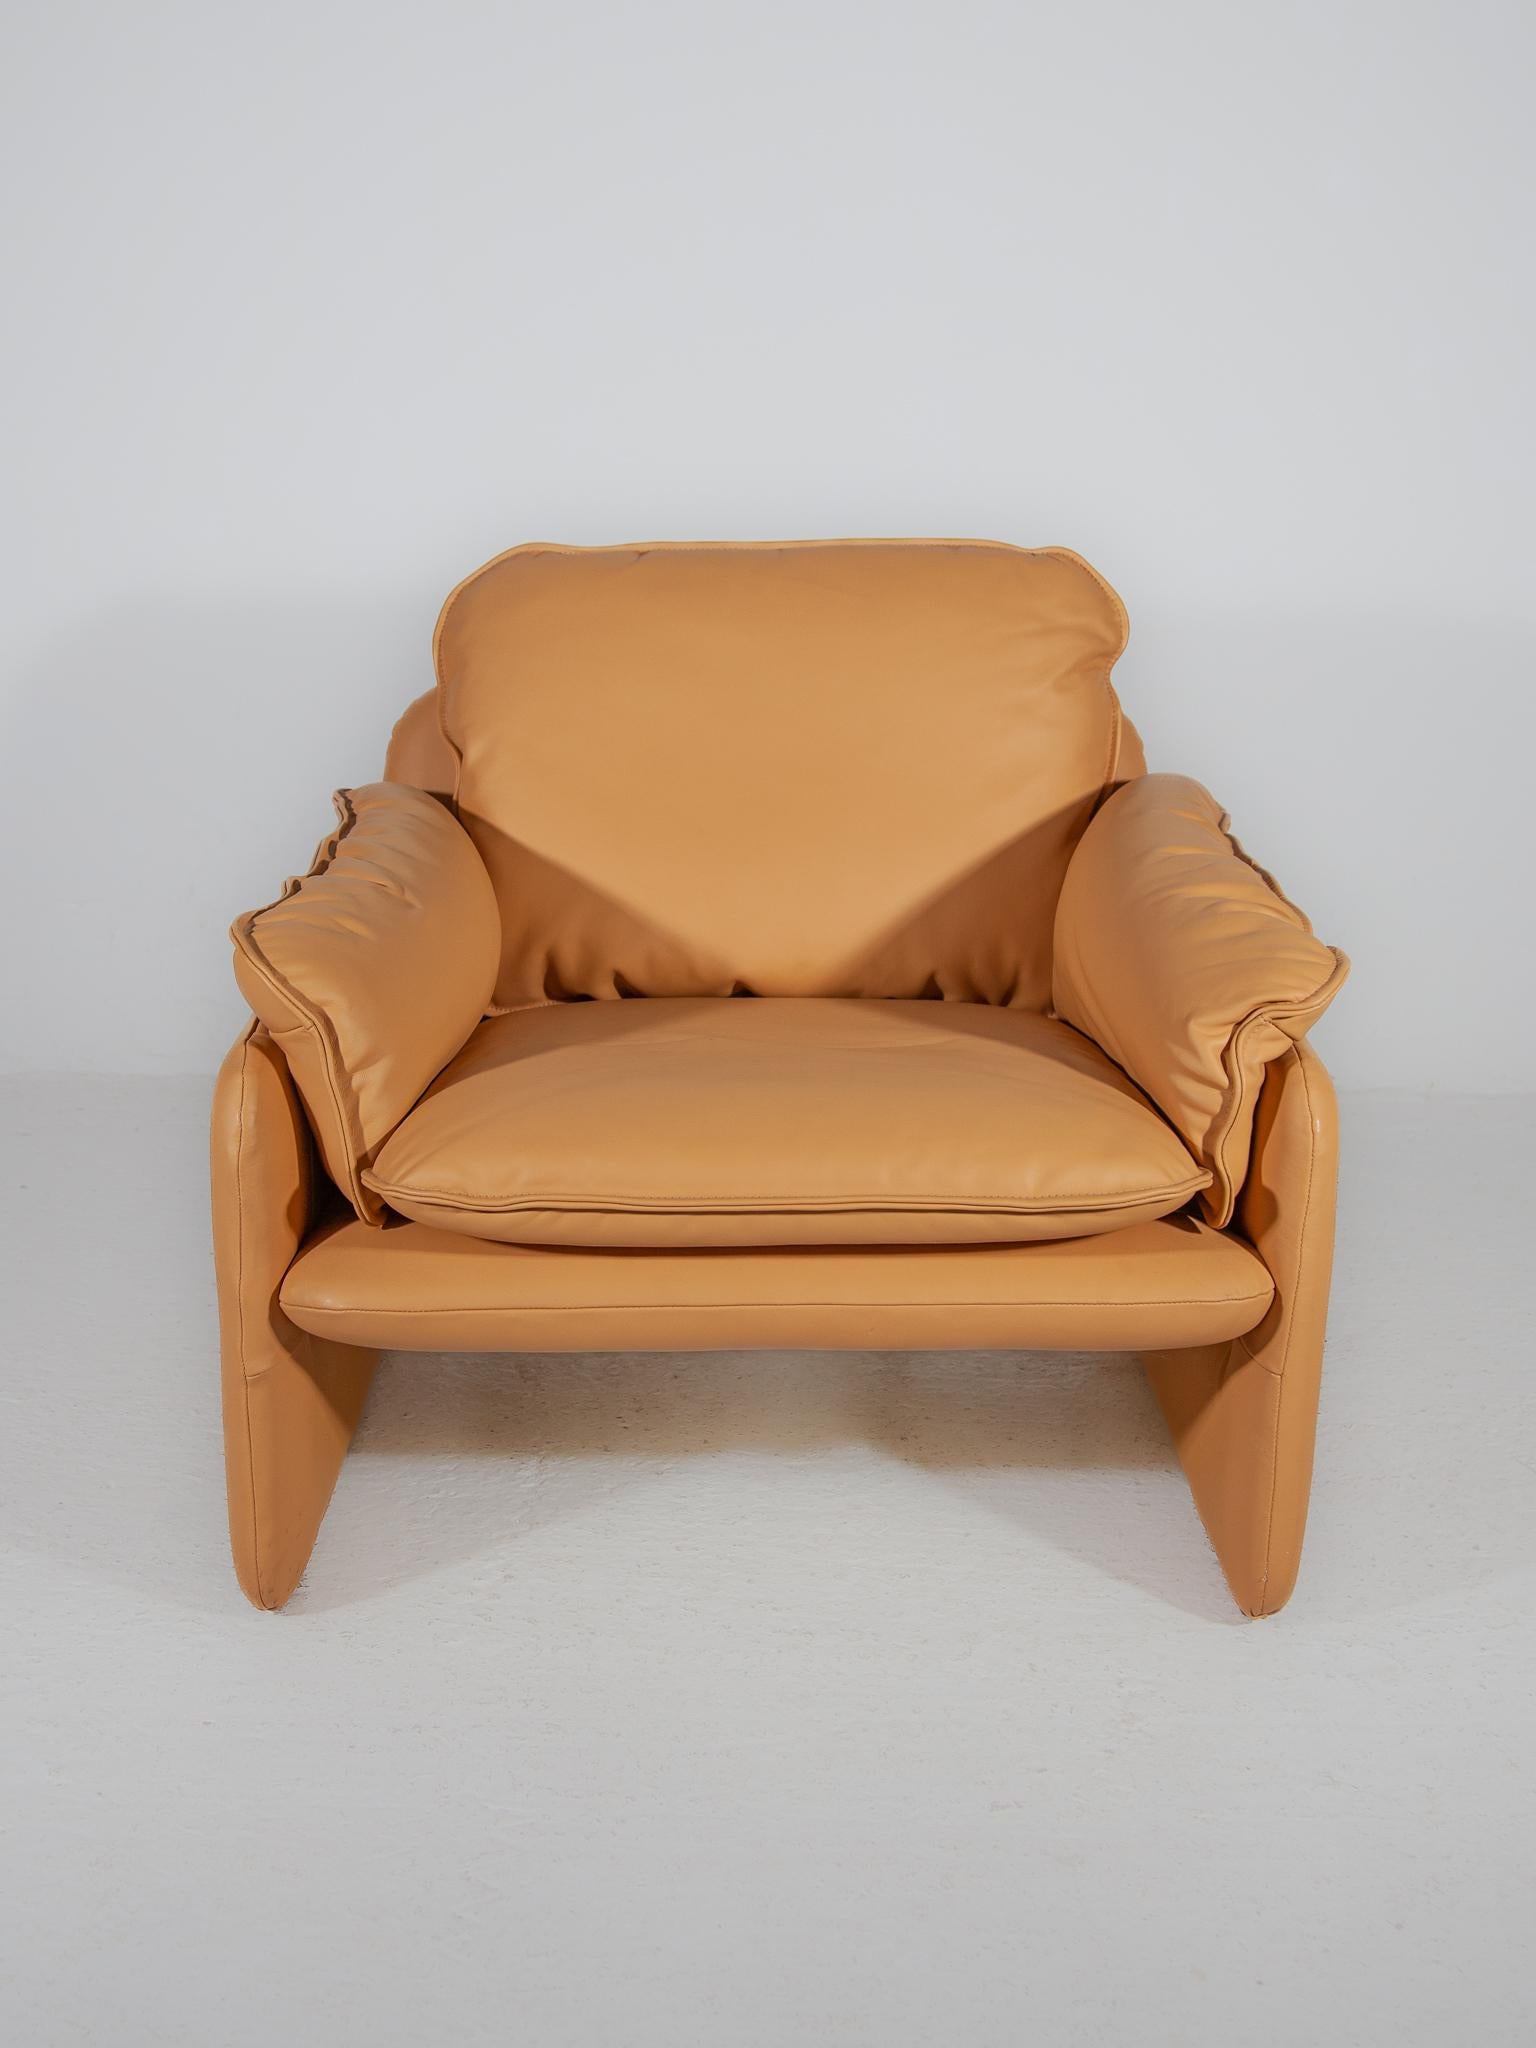 Swiss Set of 2 Ds-61 Armchairs Camel Leather designed by De Sede, 1970s For Sale